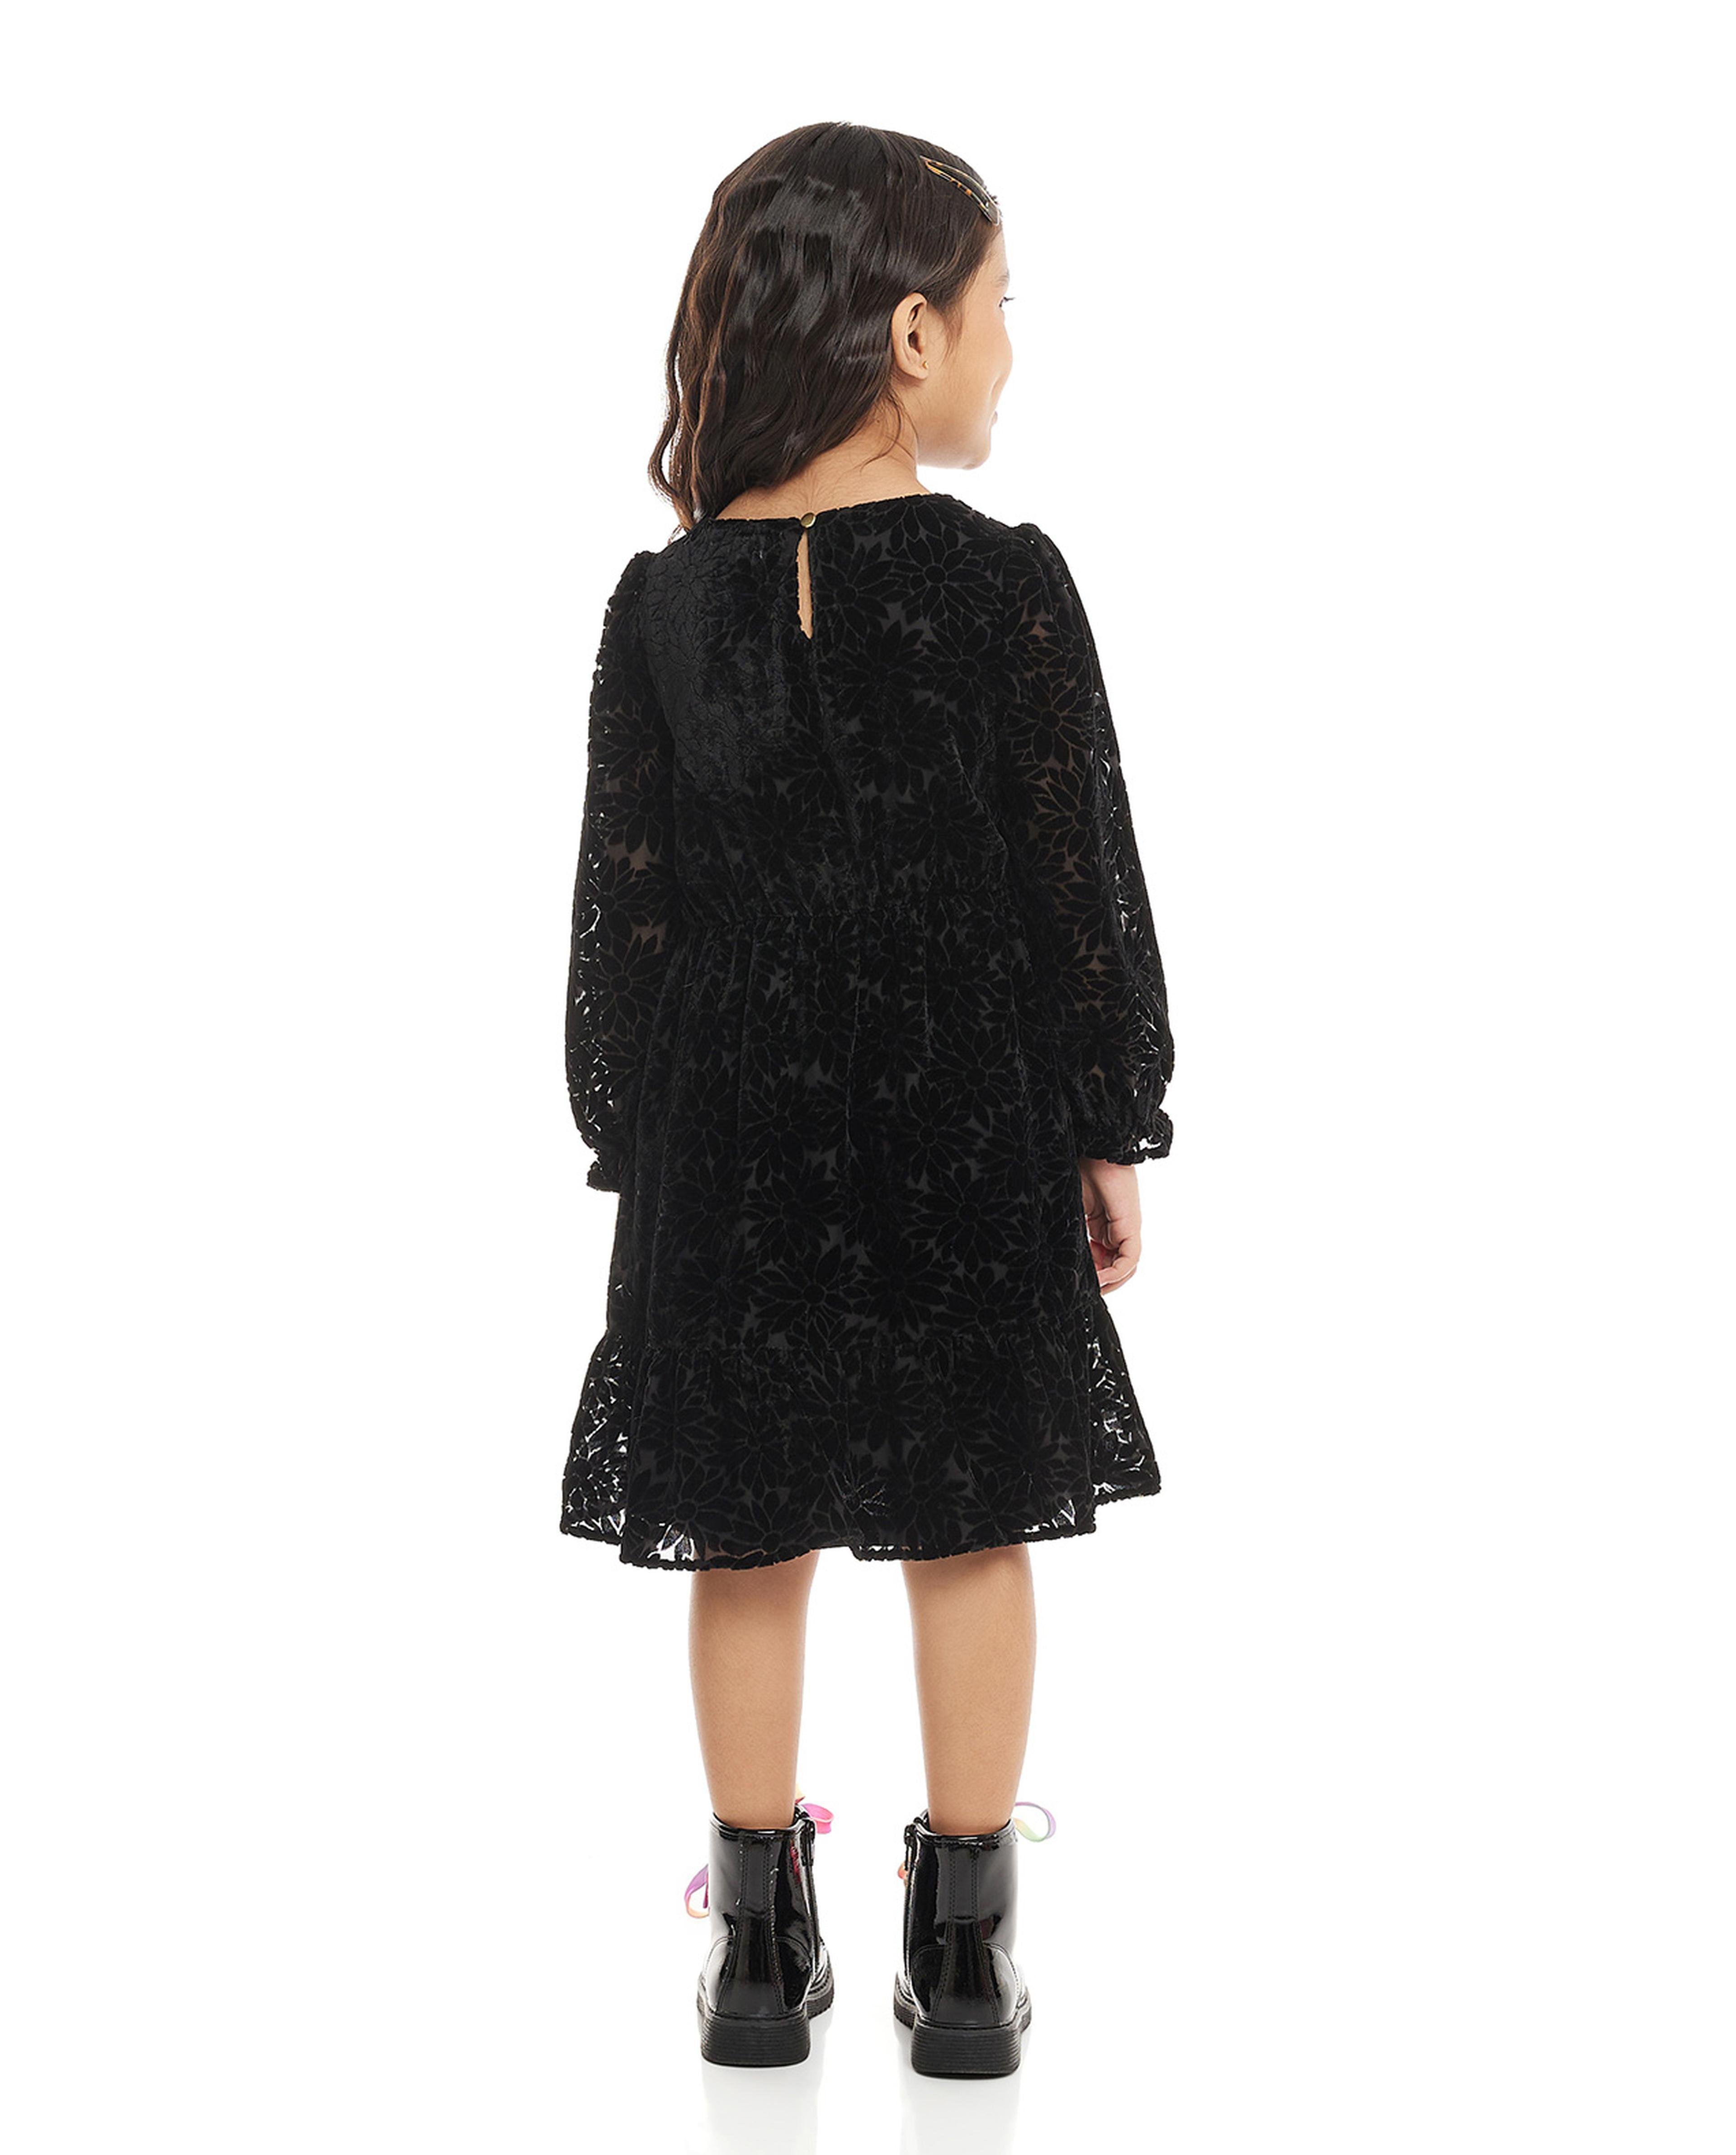 Woven Dress with Crew Neck and Long Sleeves